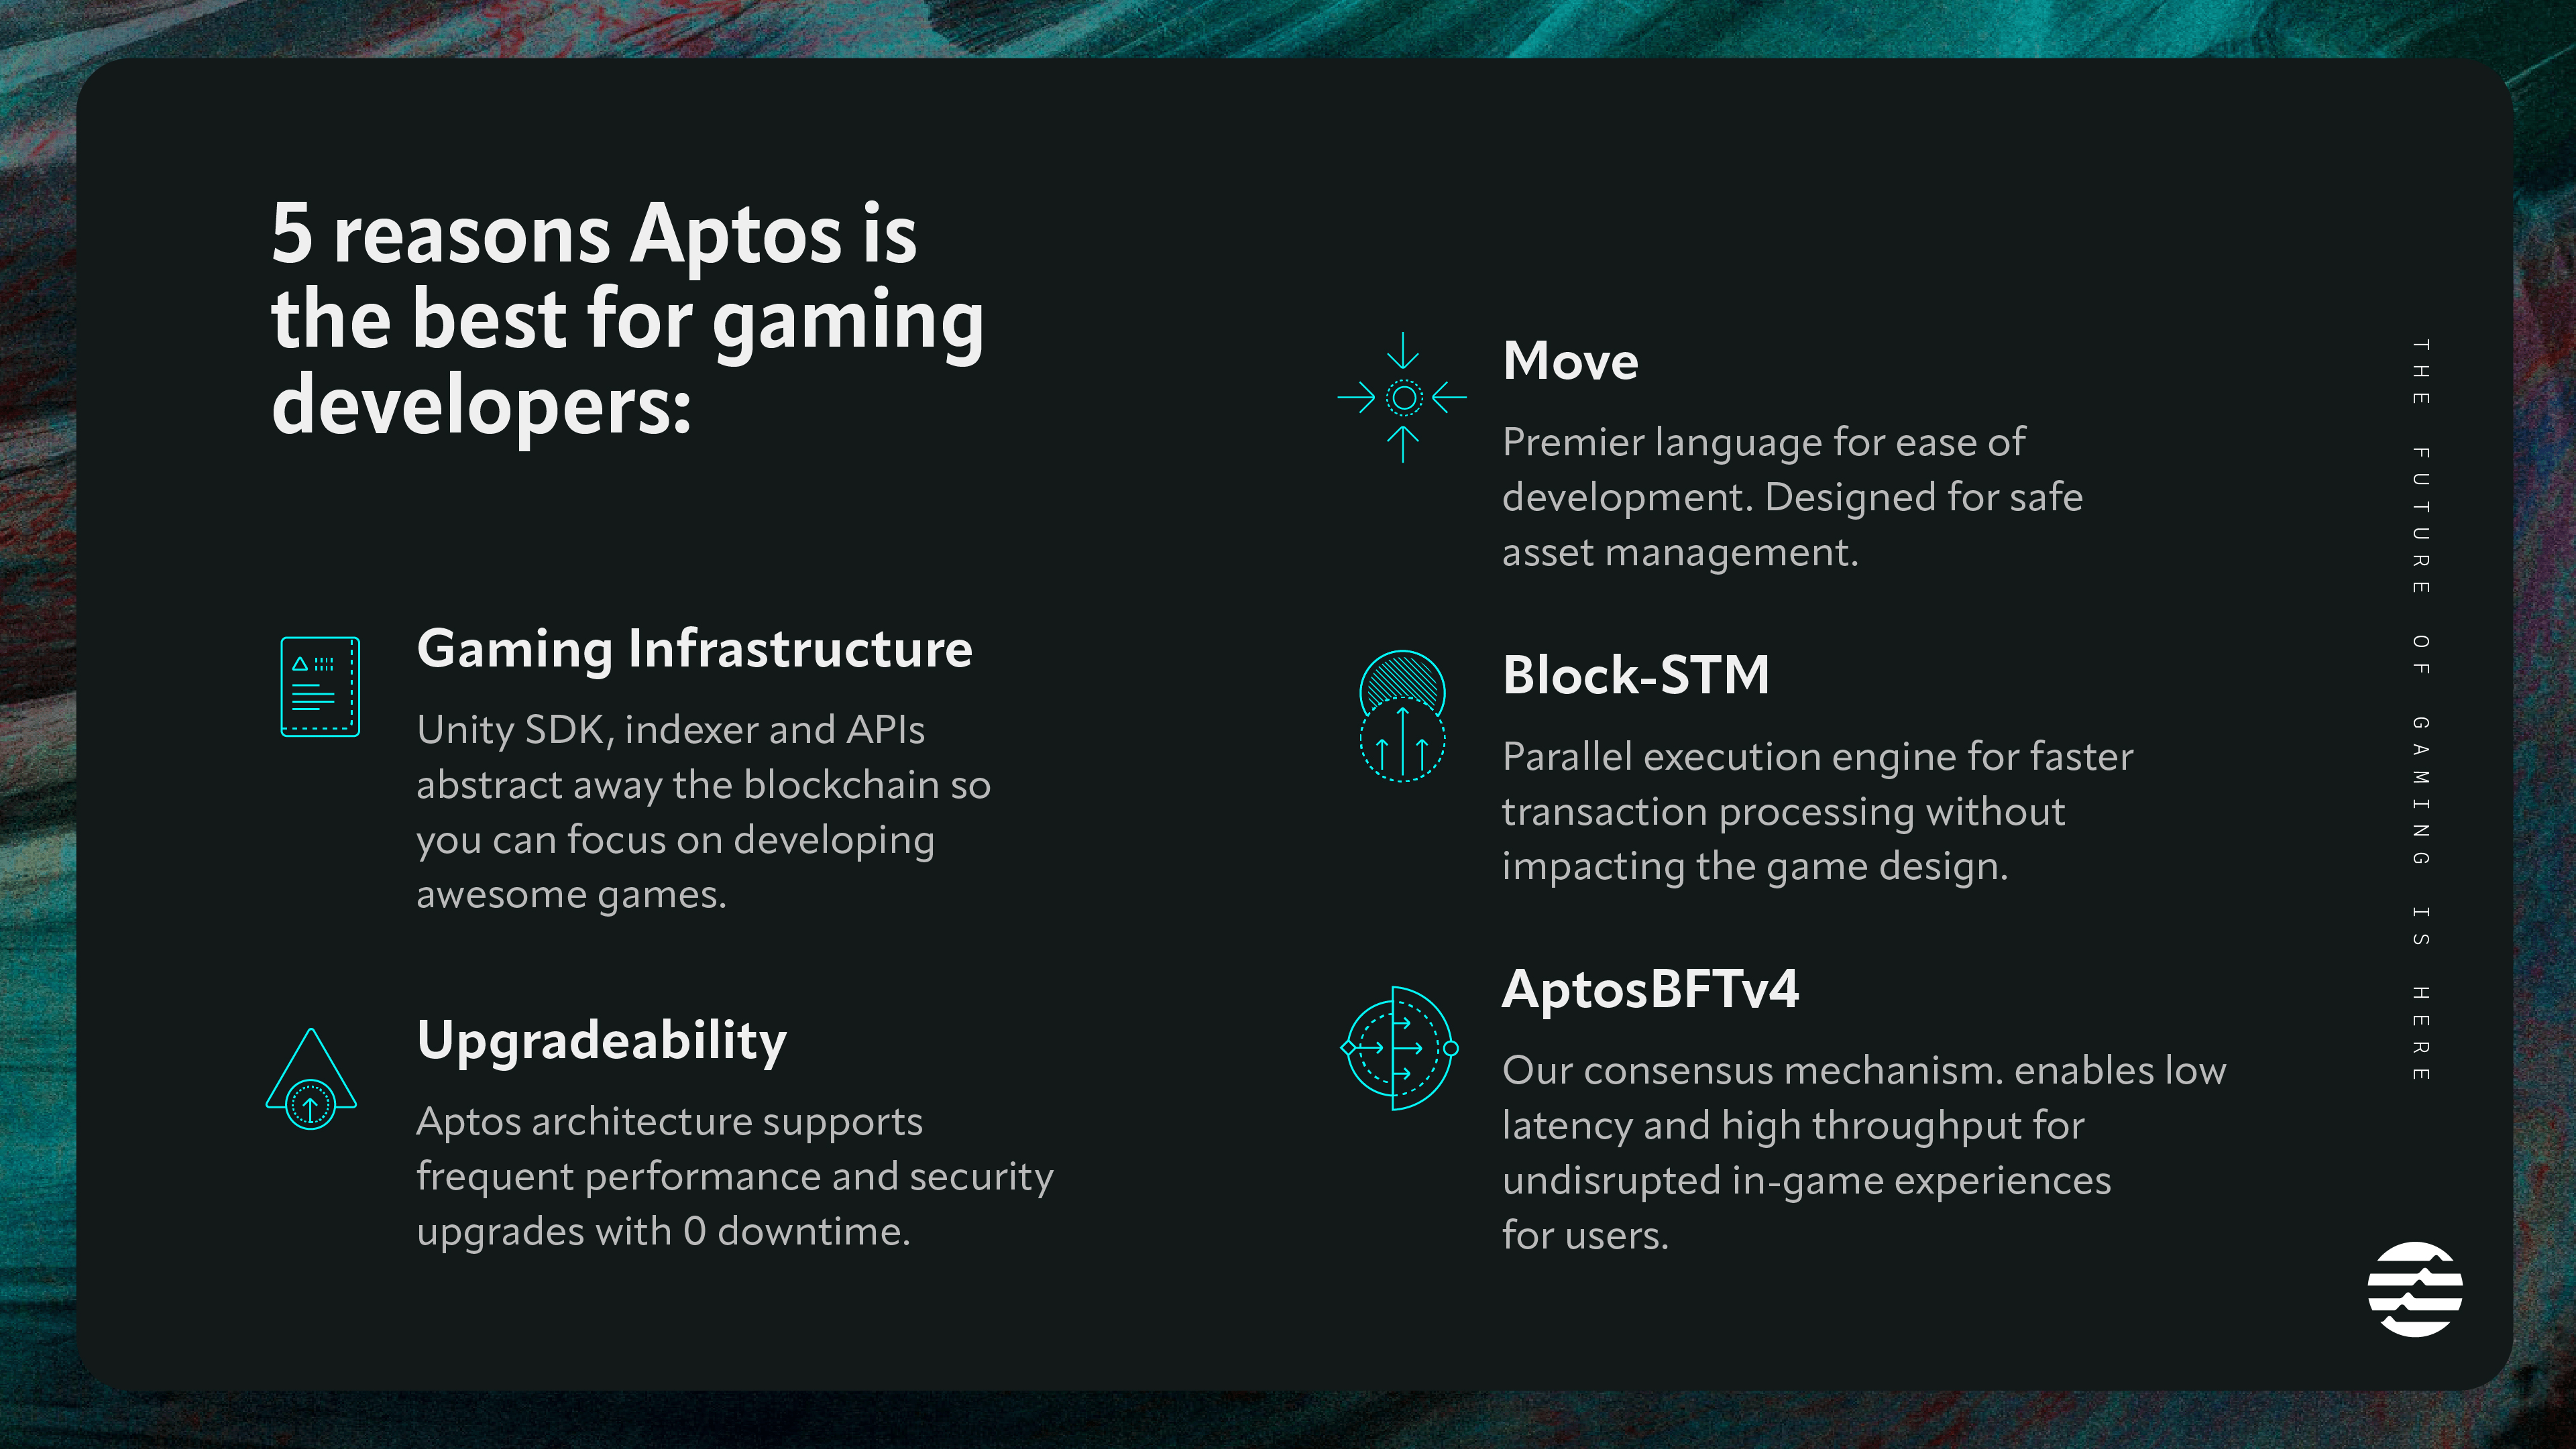 5 reasons Aptos is the best for gaming developers